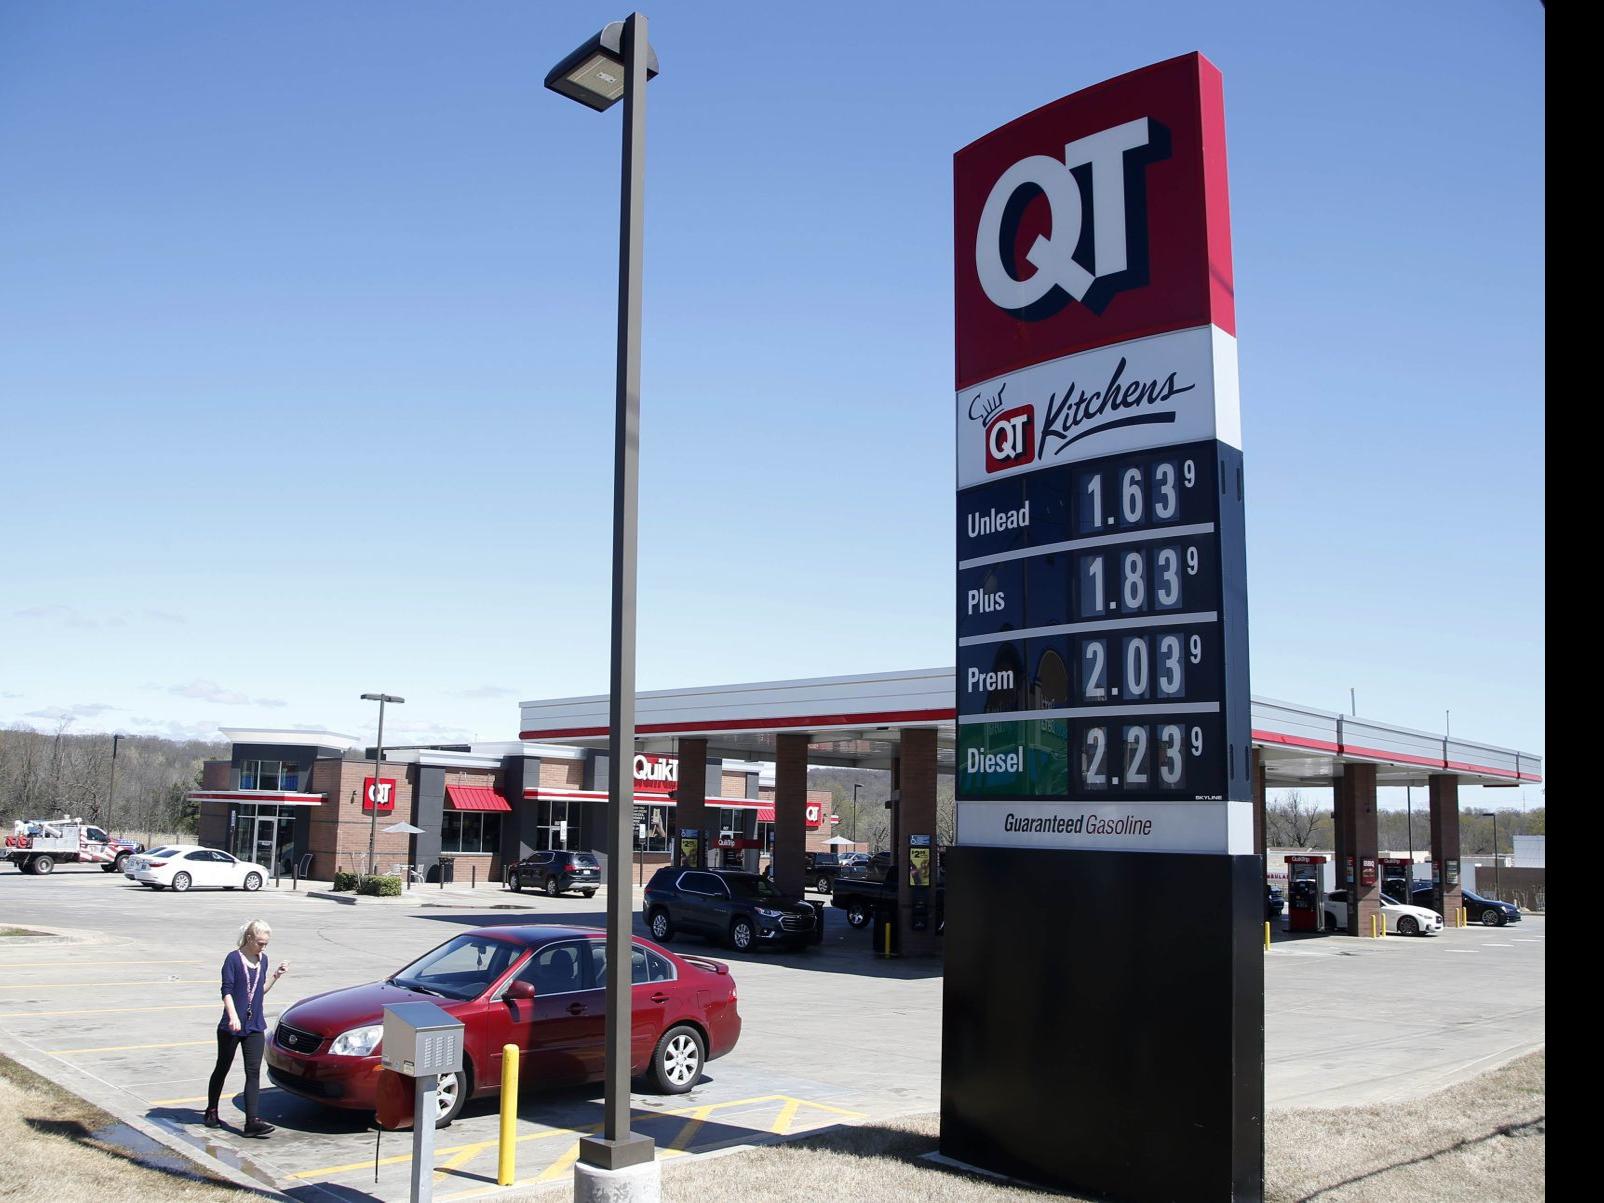 average gas prices in tulsa down 38 cents per gallon from a month ago more than 1 12 from year ago business news tulsaworld com average gas prices in tulsa down 38